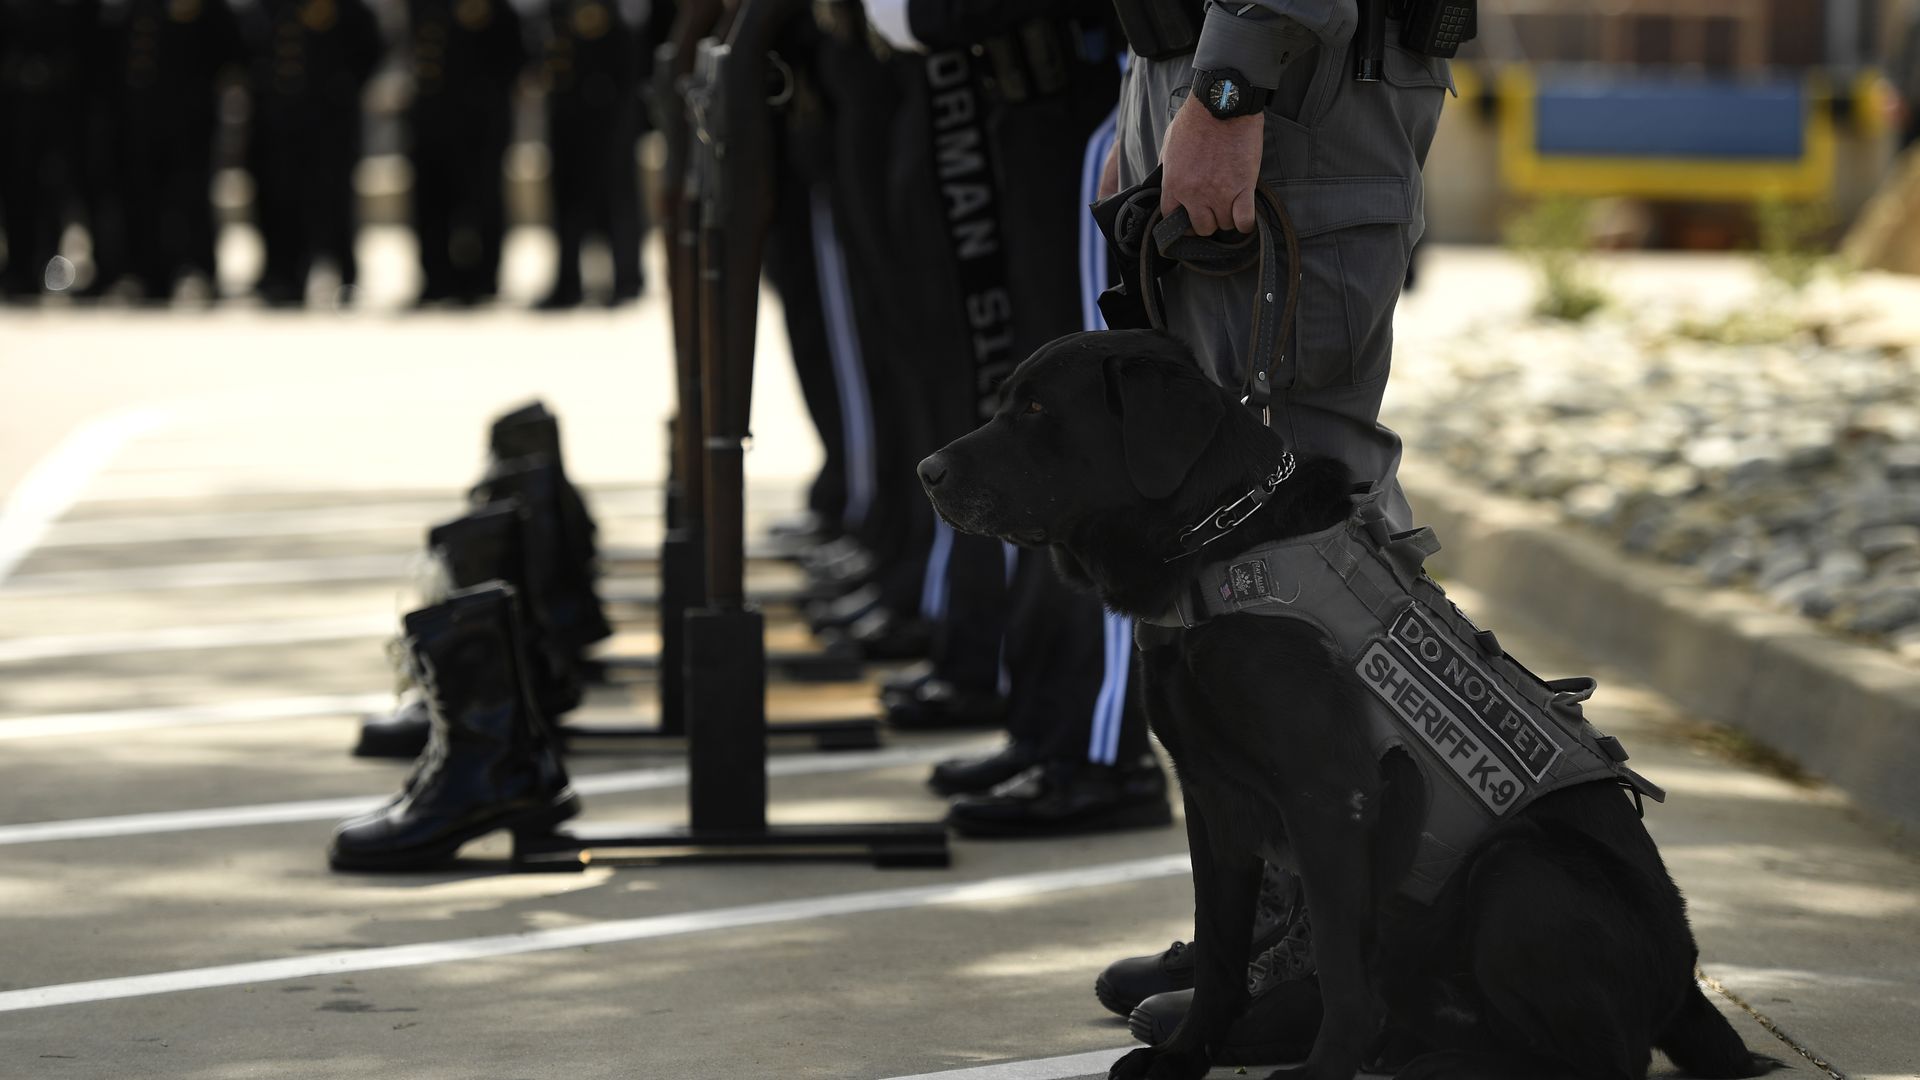 A drug dog sits next to his handler.